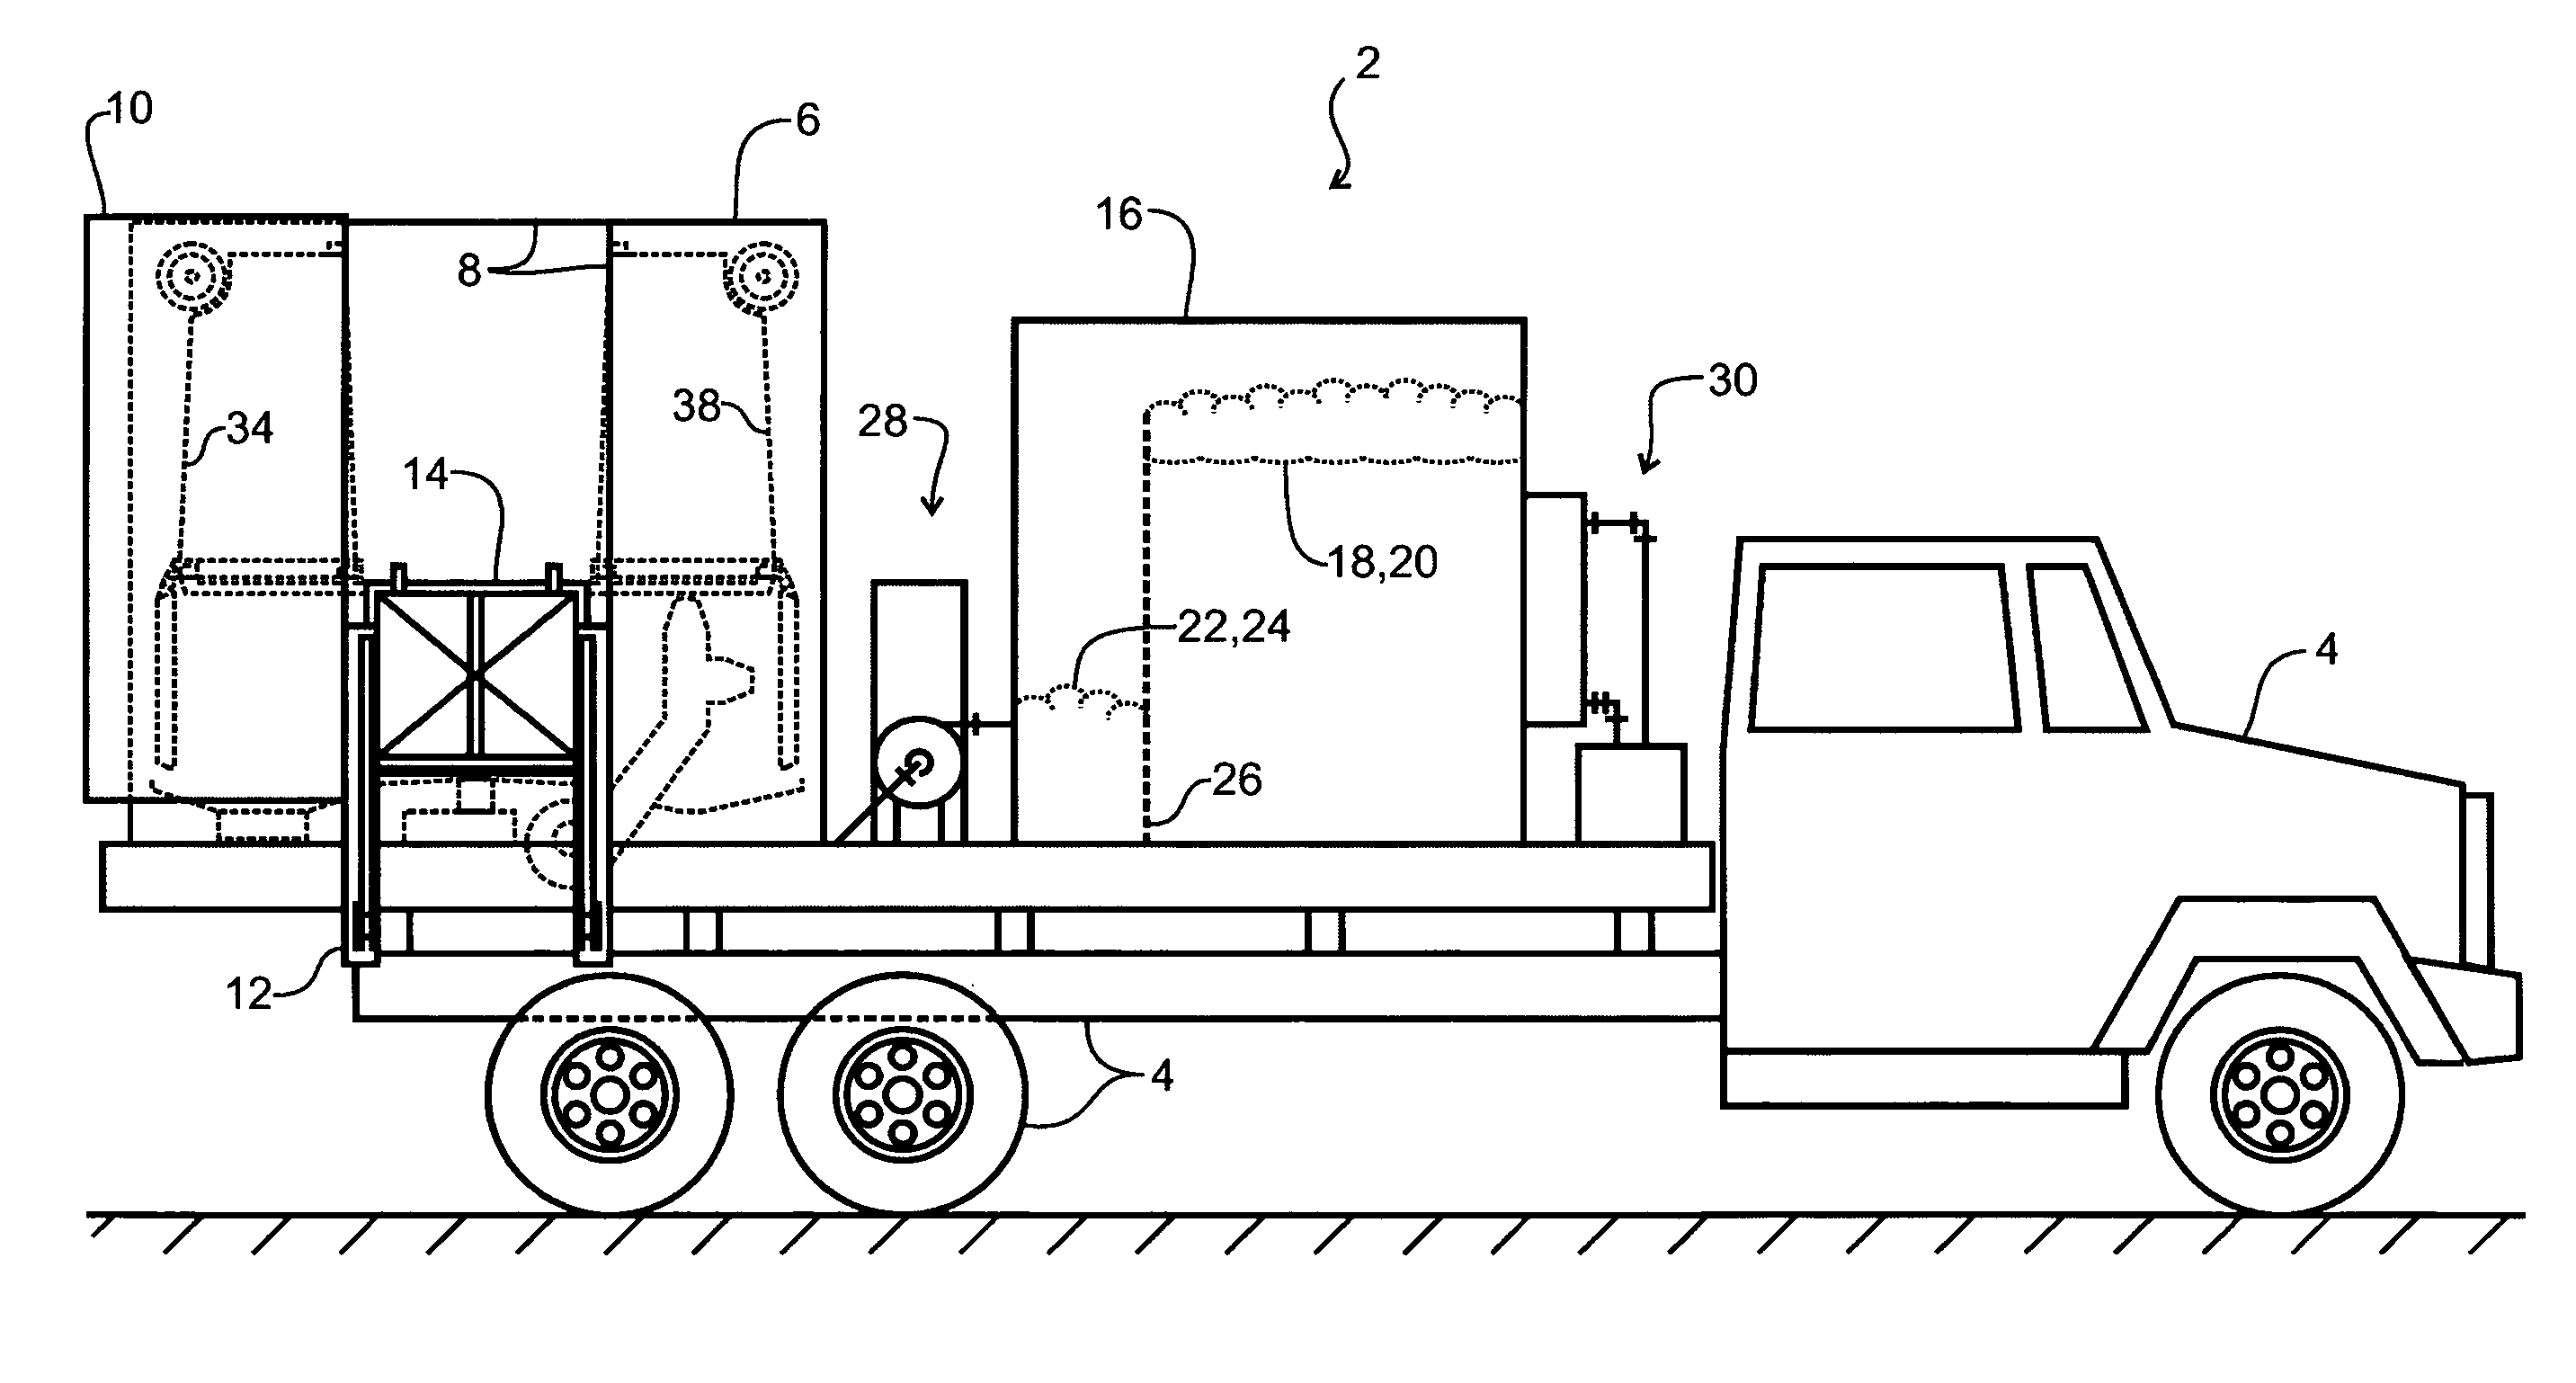 Mobile trash receptacle cleaning system and method